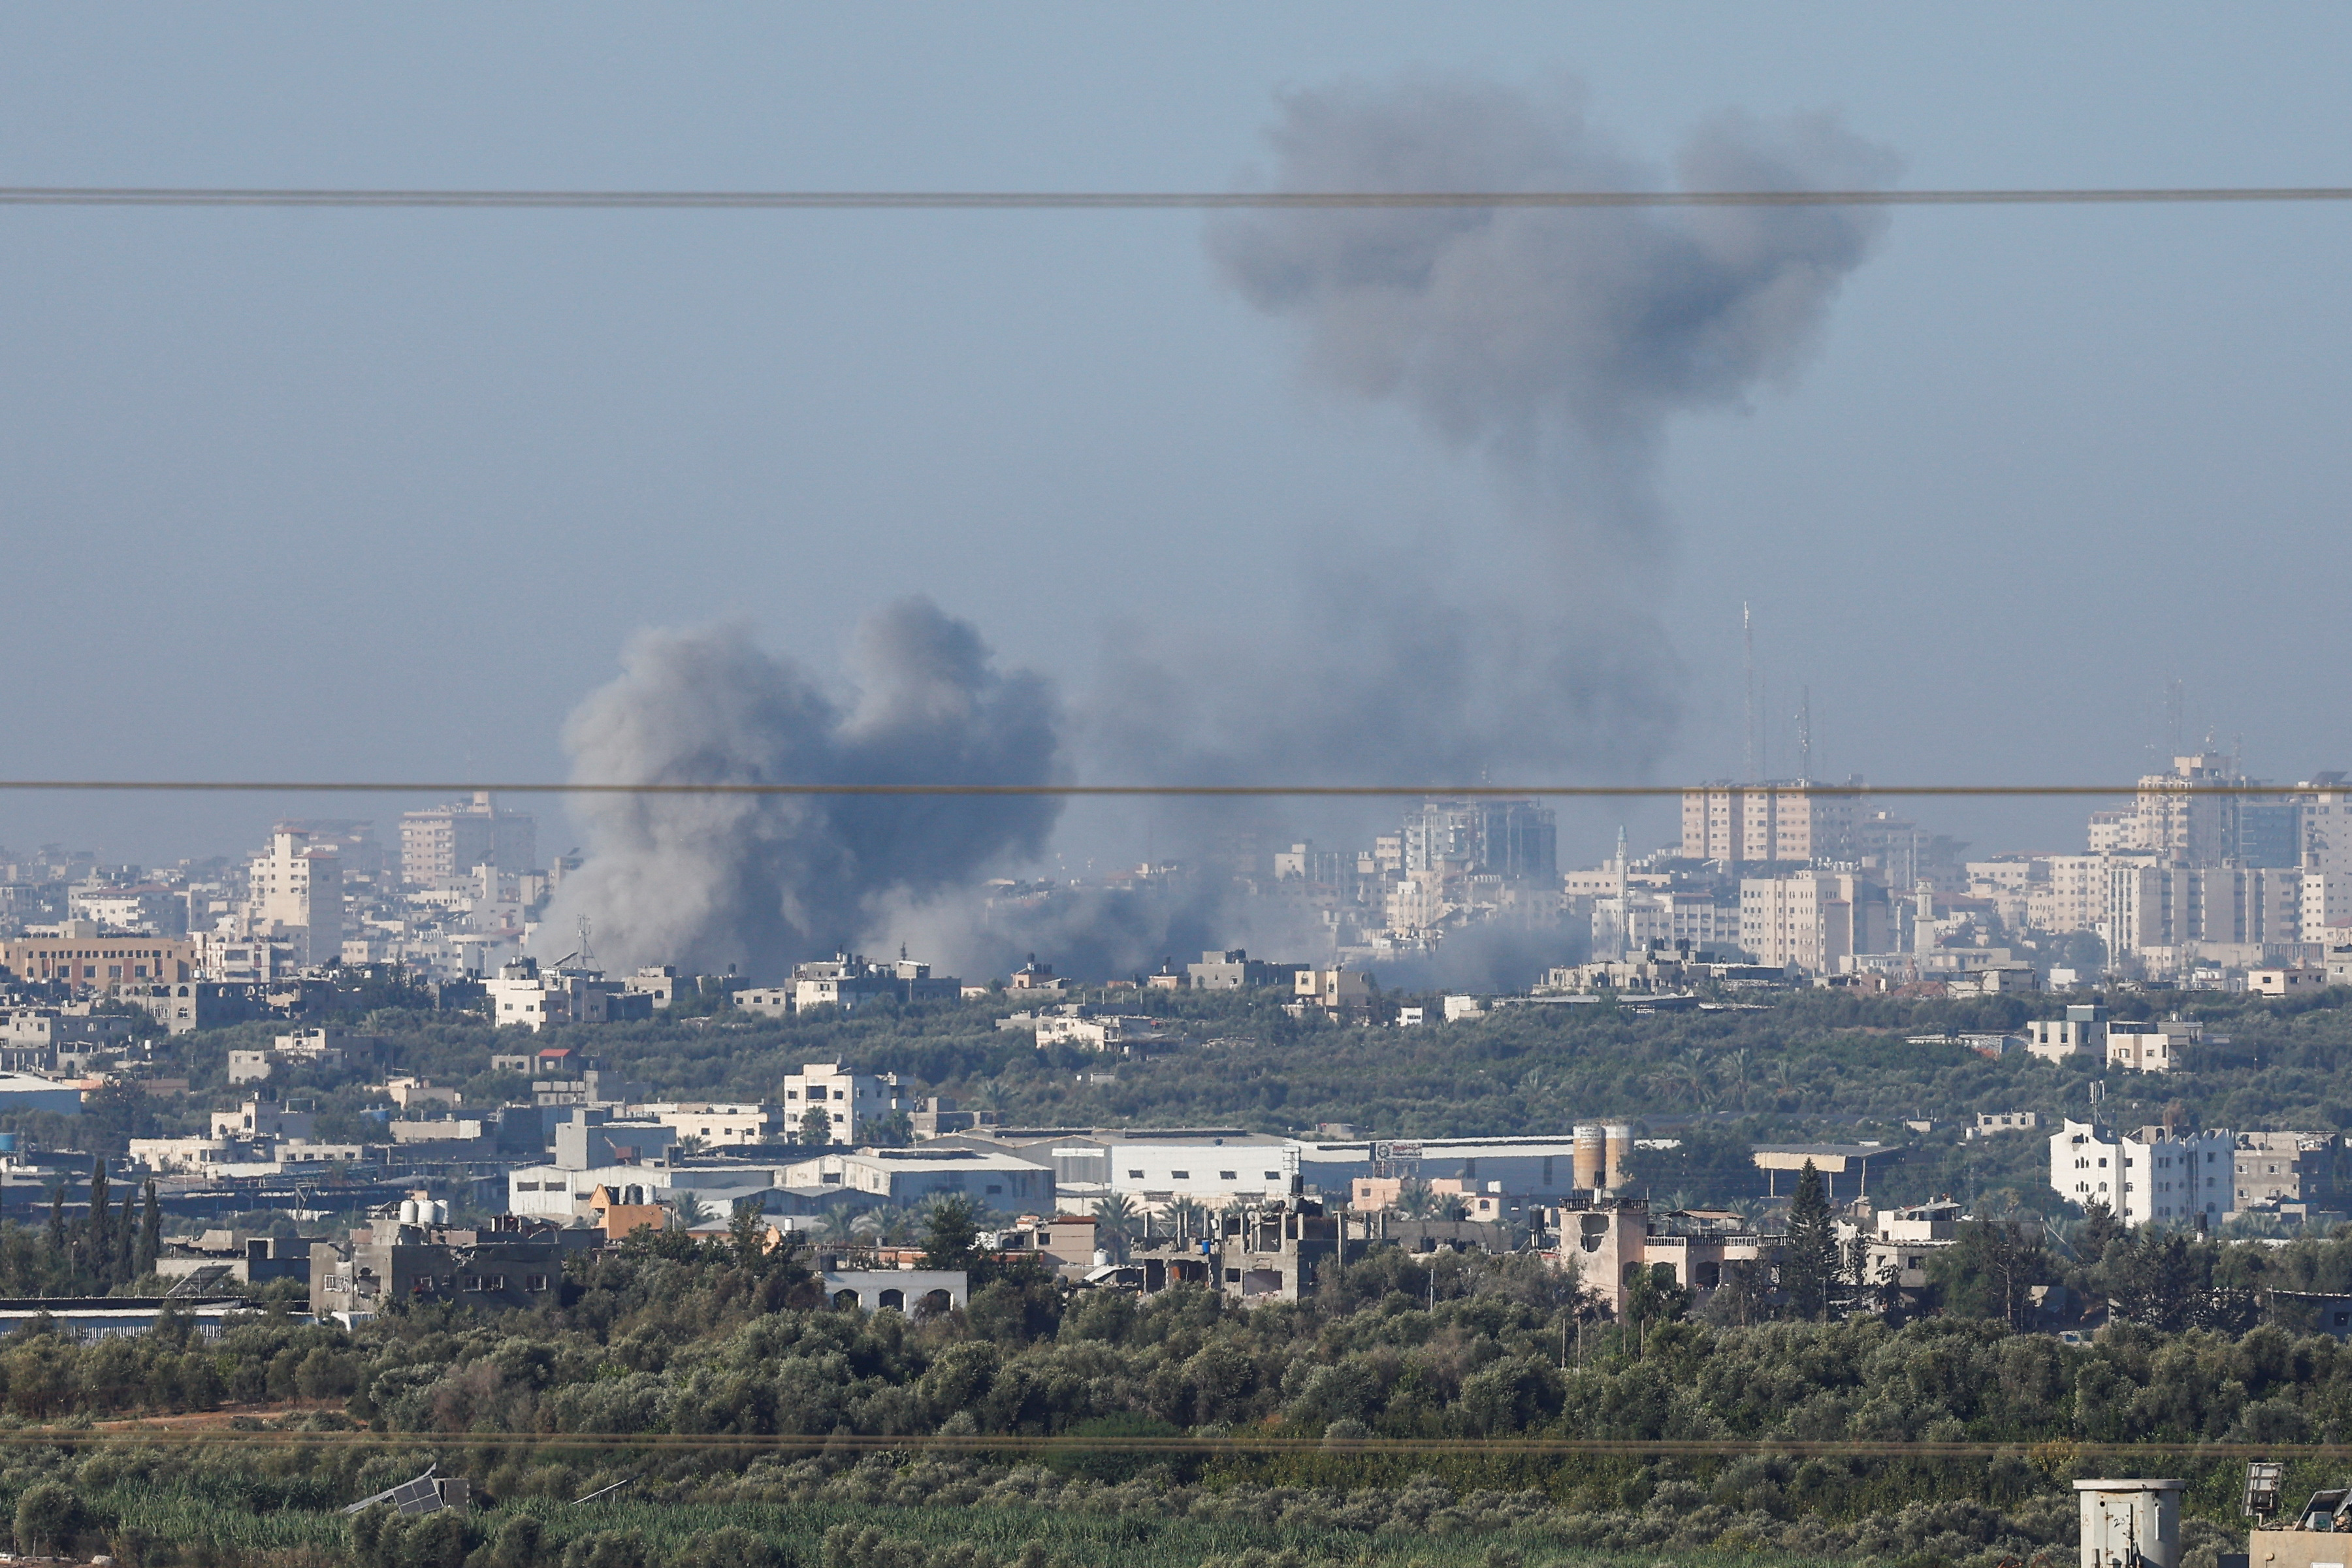 Smoke rises over Gaza, as seen from Israel's border with Gaza, in southern Israel